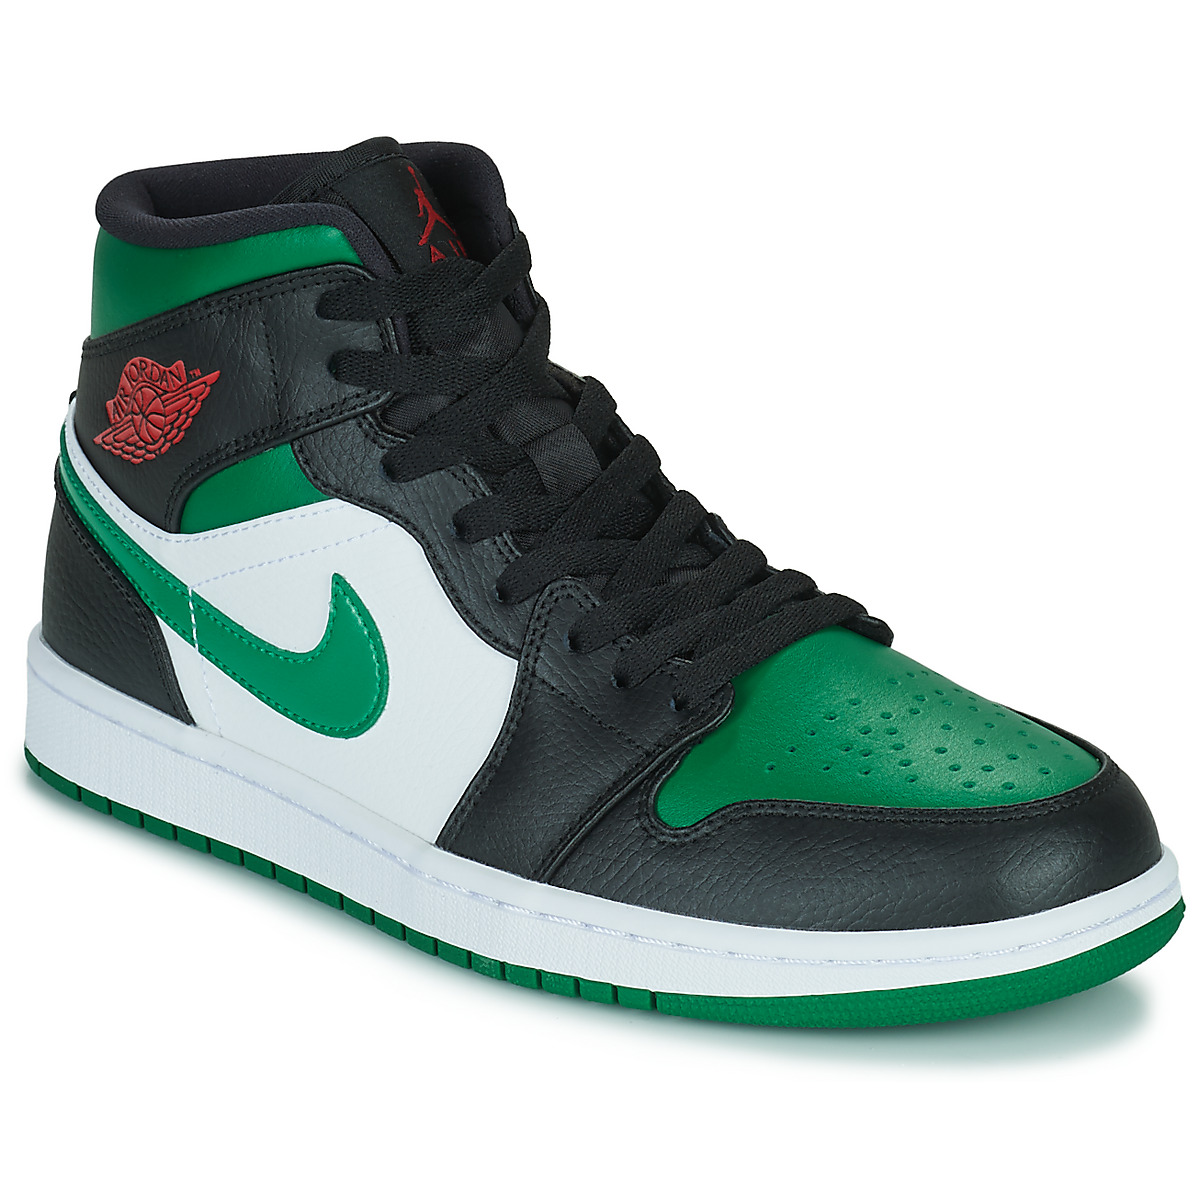 Nike AIR JORDAN 1 MID GS 'Pine Green' White - Fast delivery